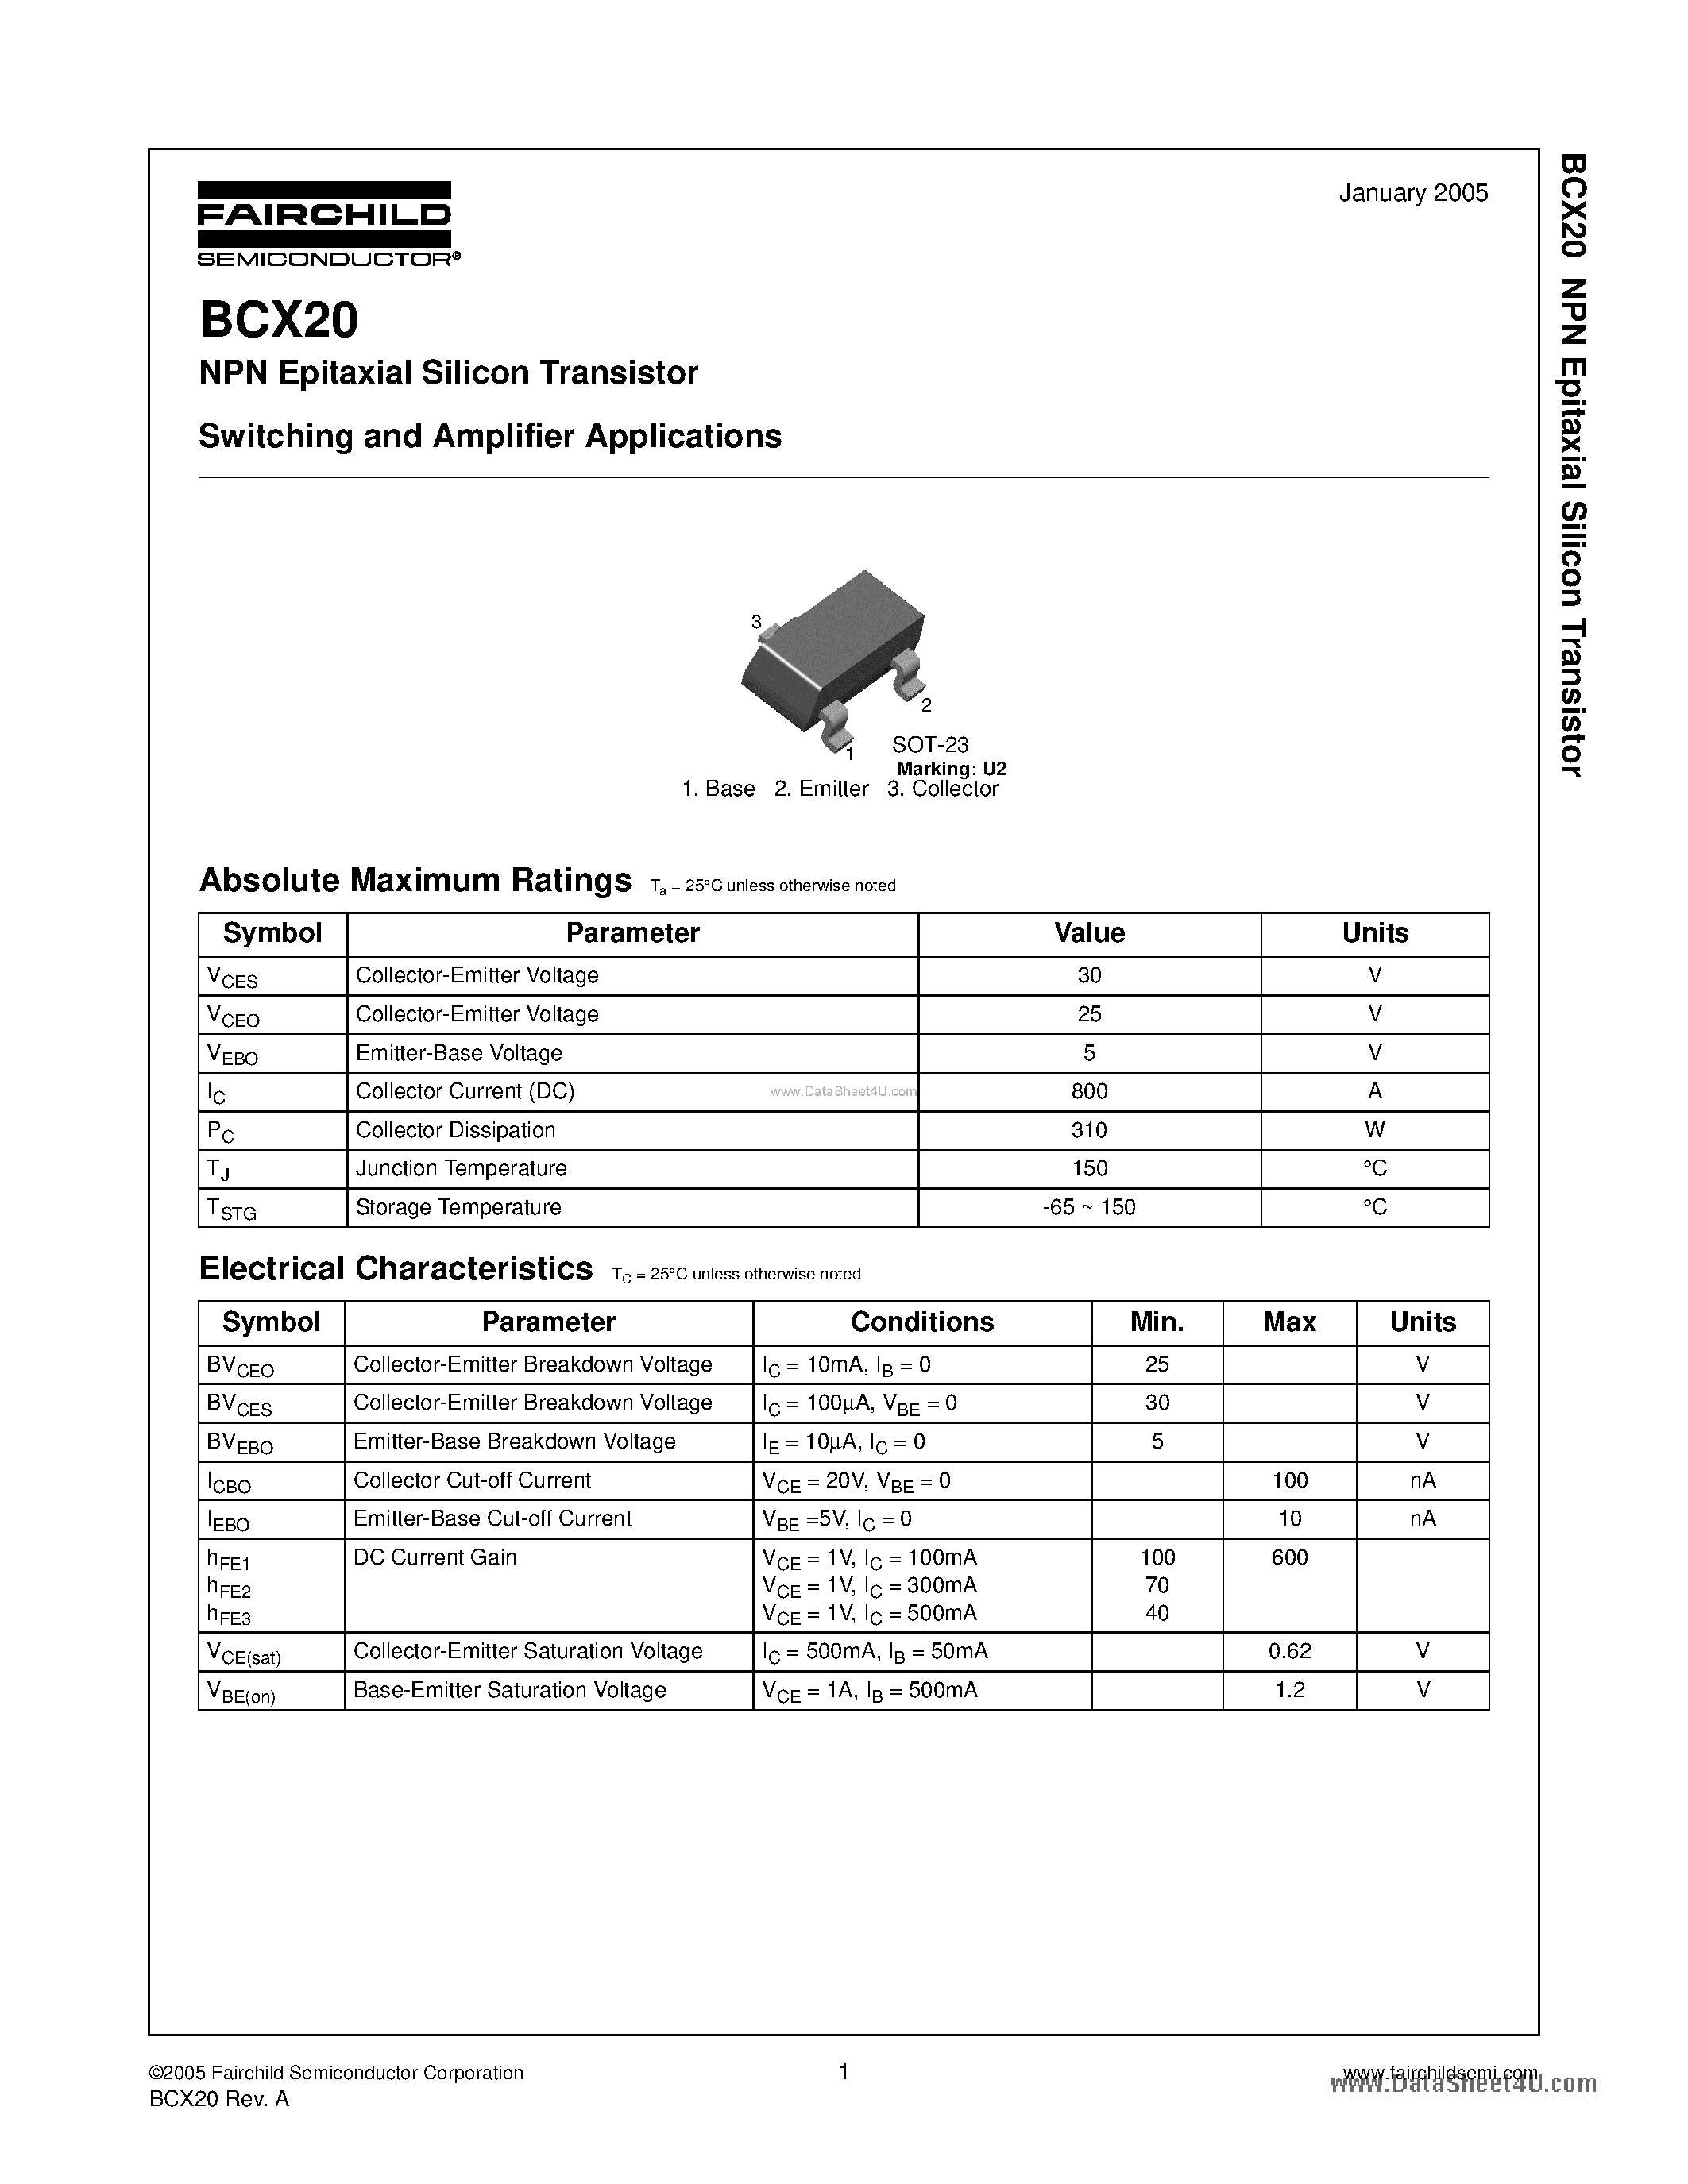 Datasheet BCX20 - NPN Epitaxial Silicon Transistor Switching and Amplifier Applications page 1